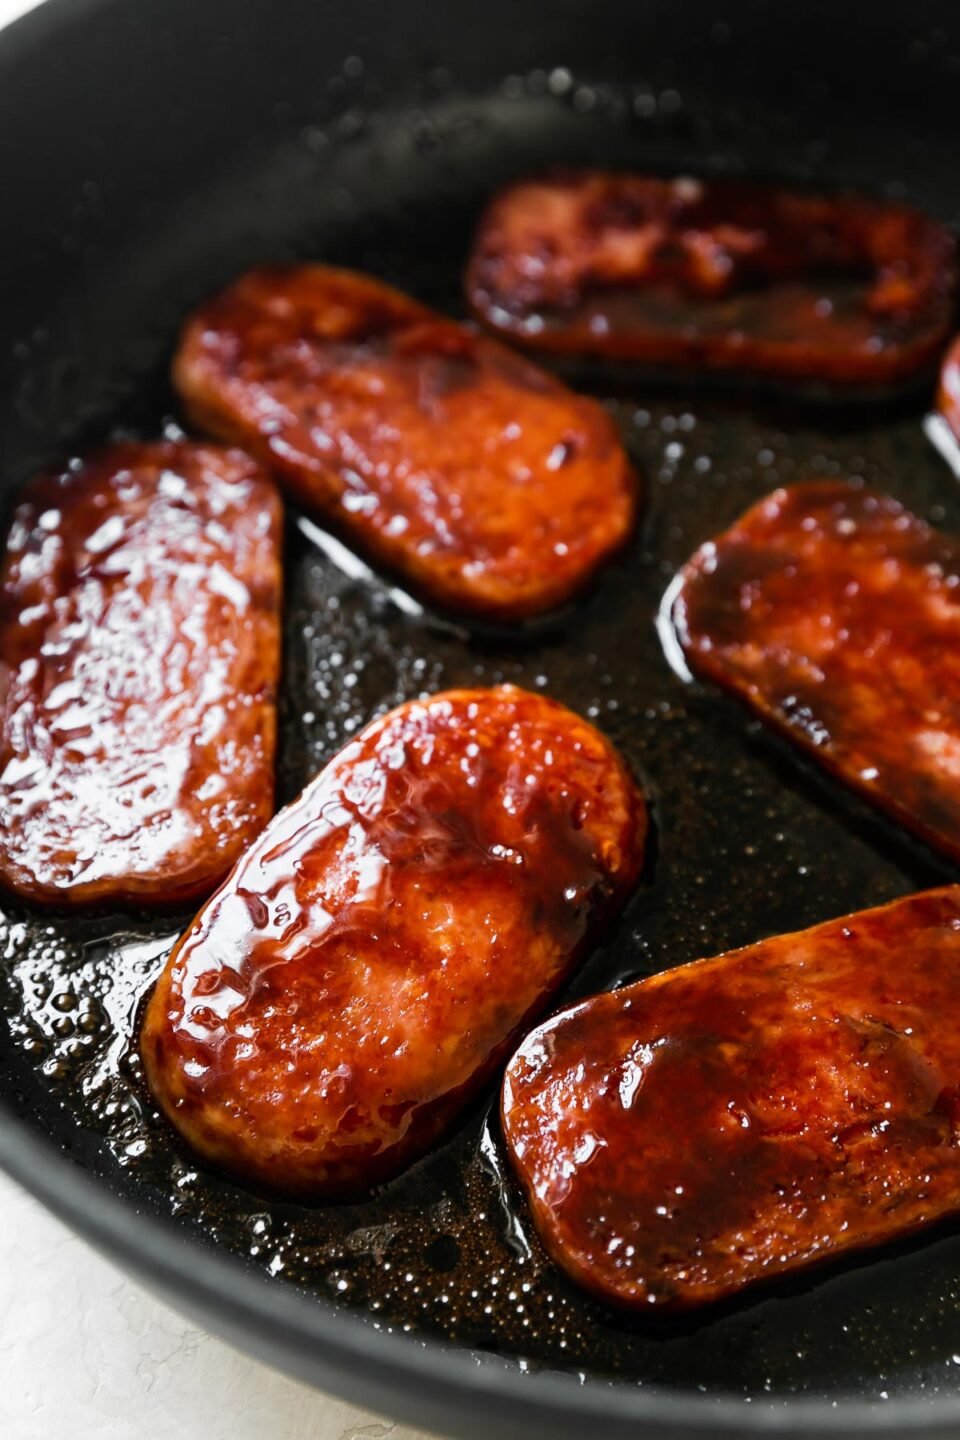 Spam glazed with teriyaki sauce pan fries in a large black skillet. The pan sits atop a creamy white textured surface.